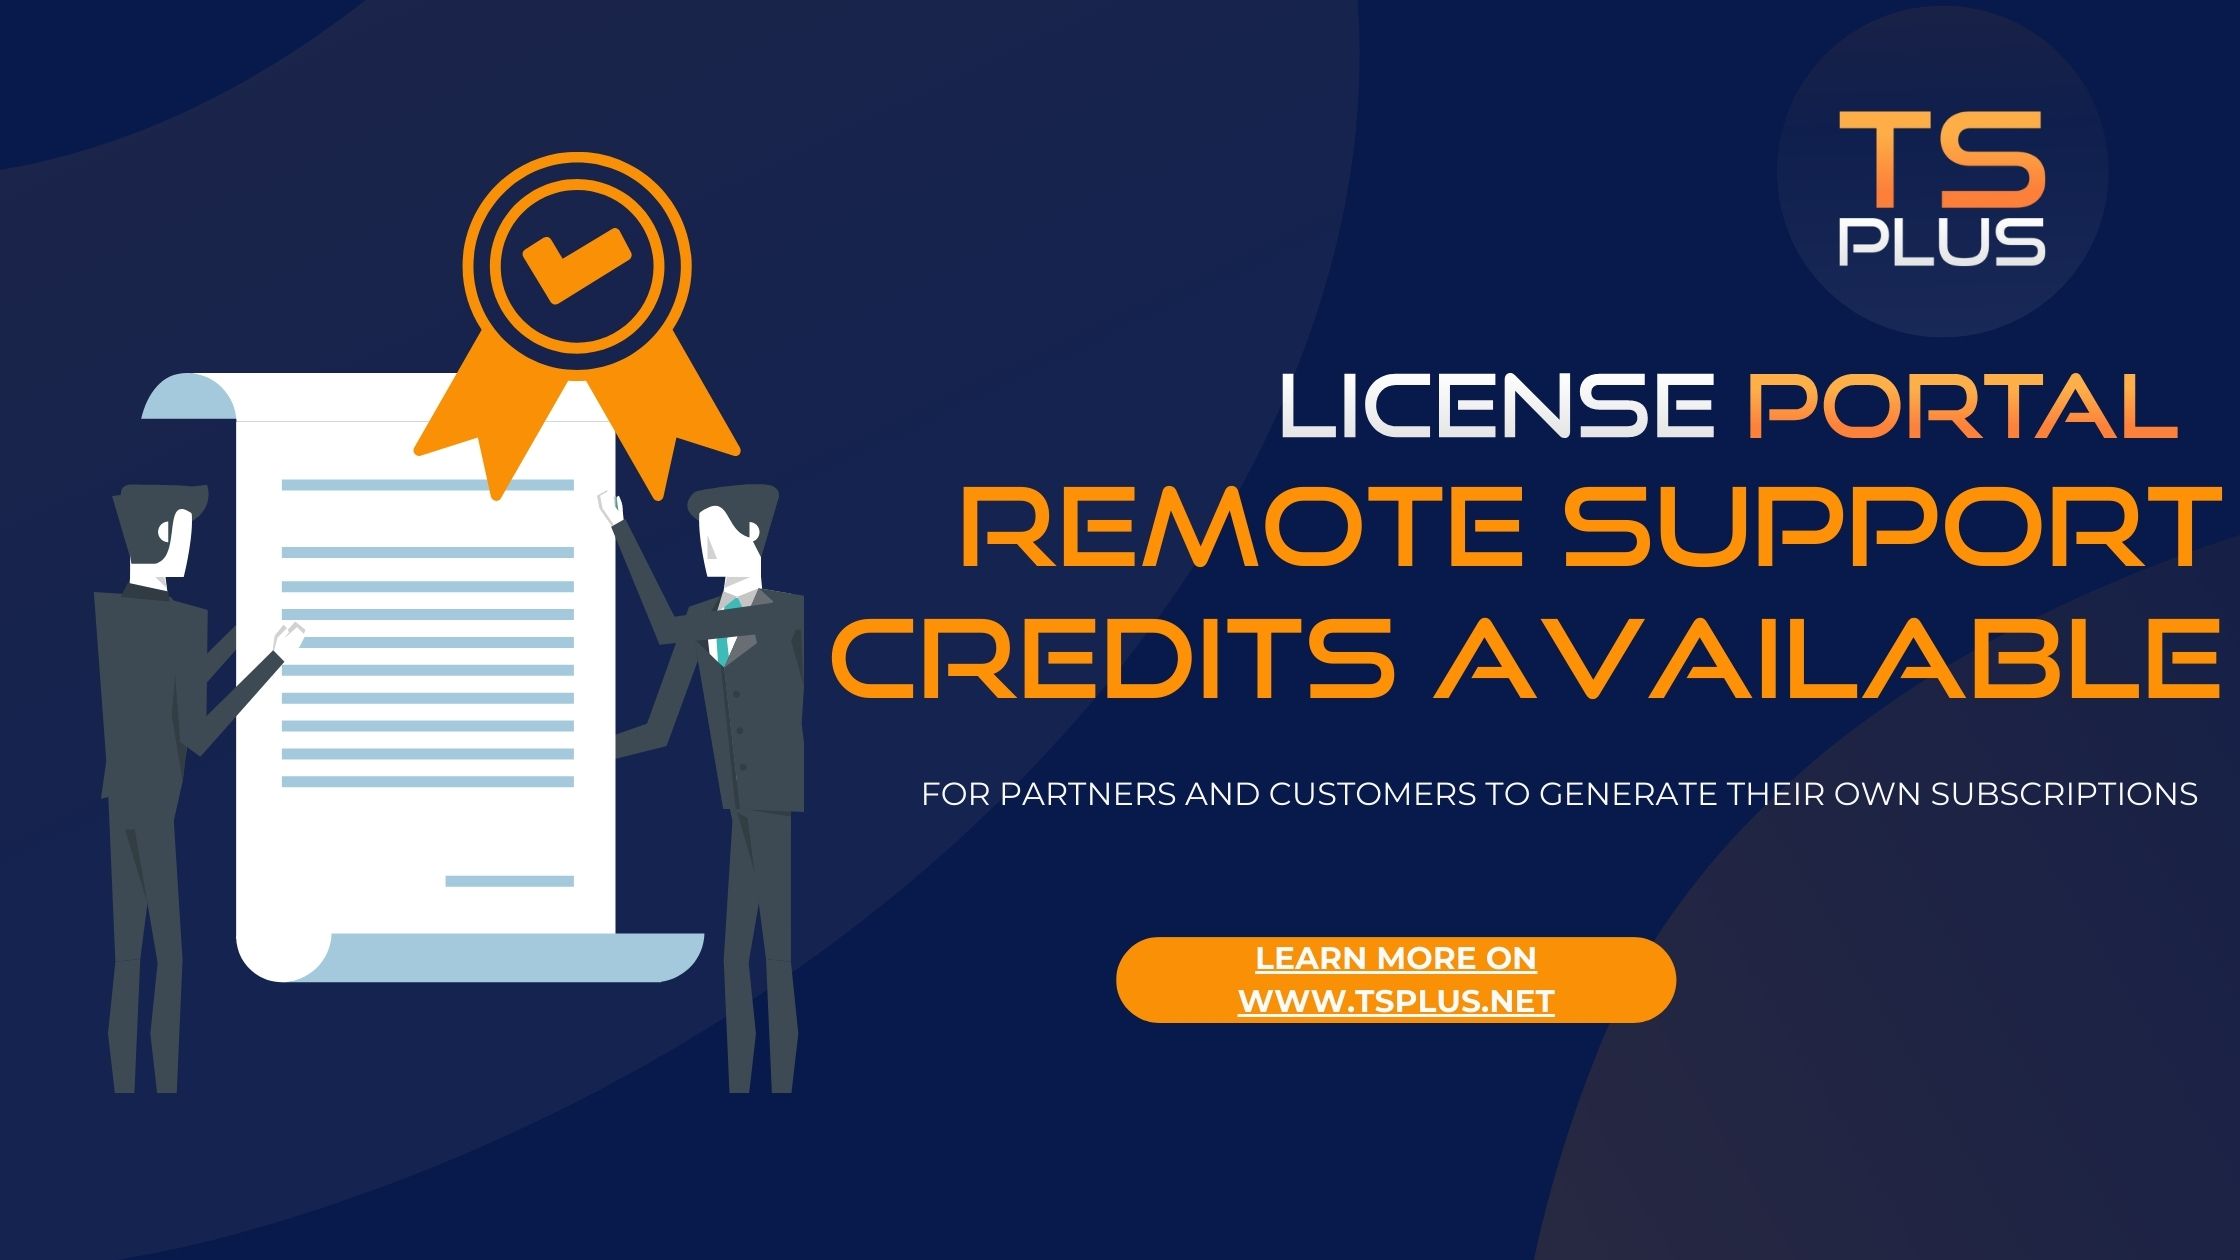 TSplus License Portal Now Offers Remote Support Credits